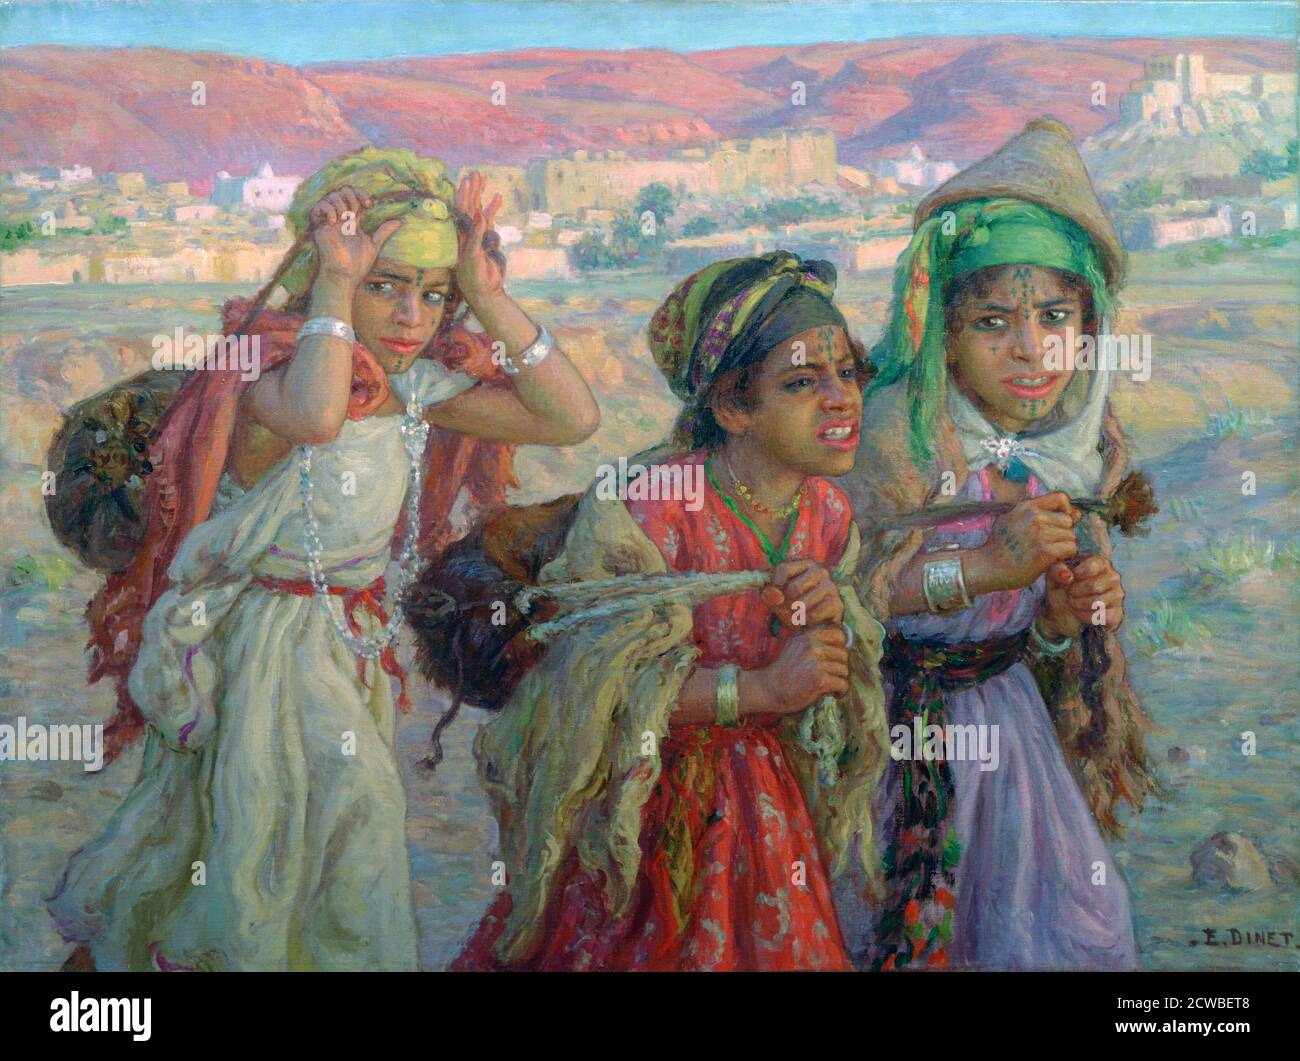 Young Girls Carrying Water', c1881-1926. Artist: Etienne Dinet. Etienne Dinet (1861-1929) was a French orientalist painter and was one of the founders of the Societe des Peintres Orientalistes. Stock Photo